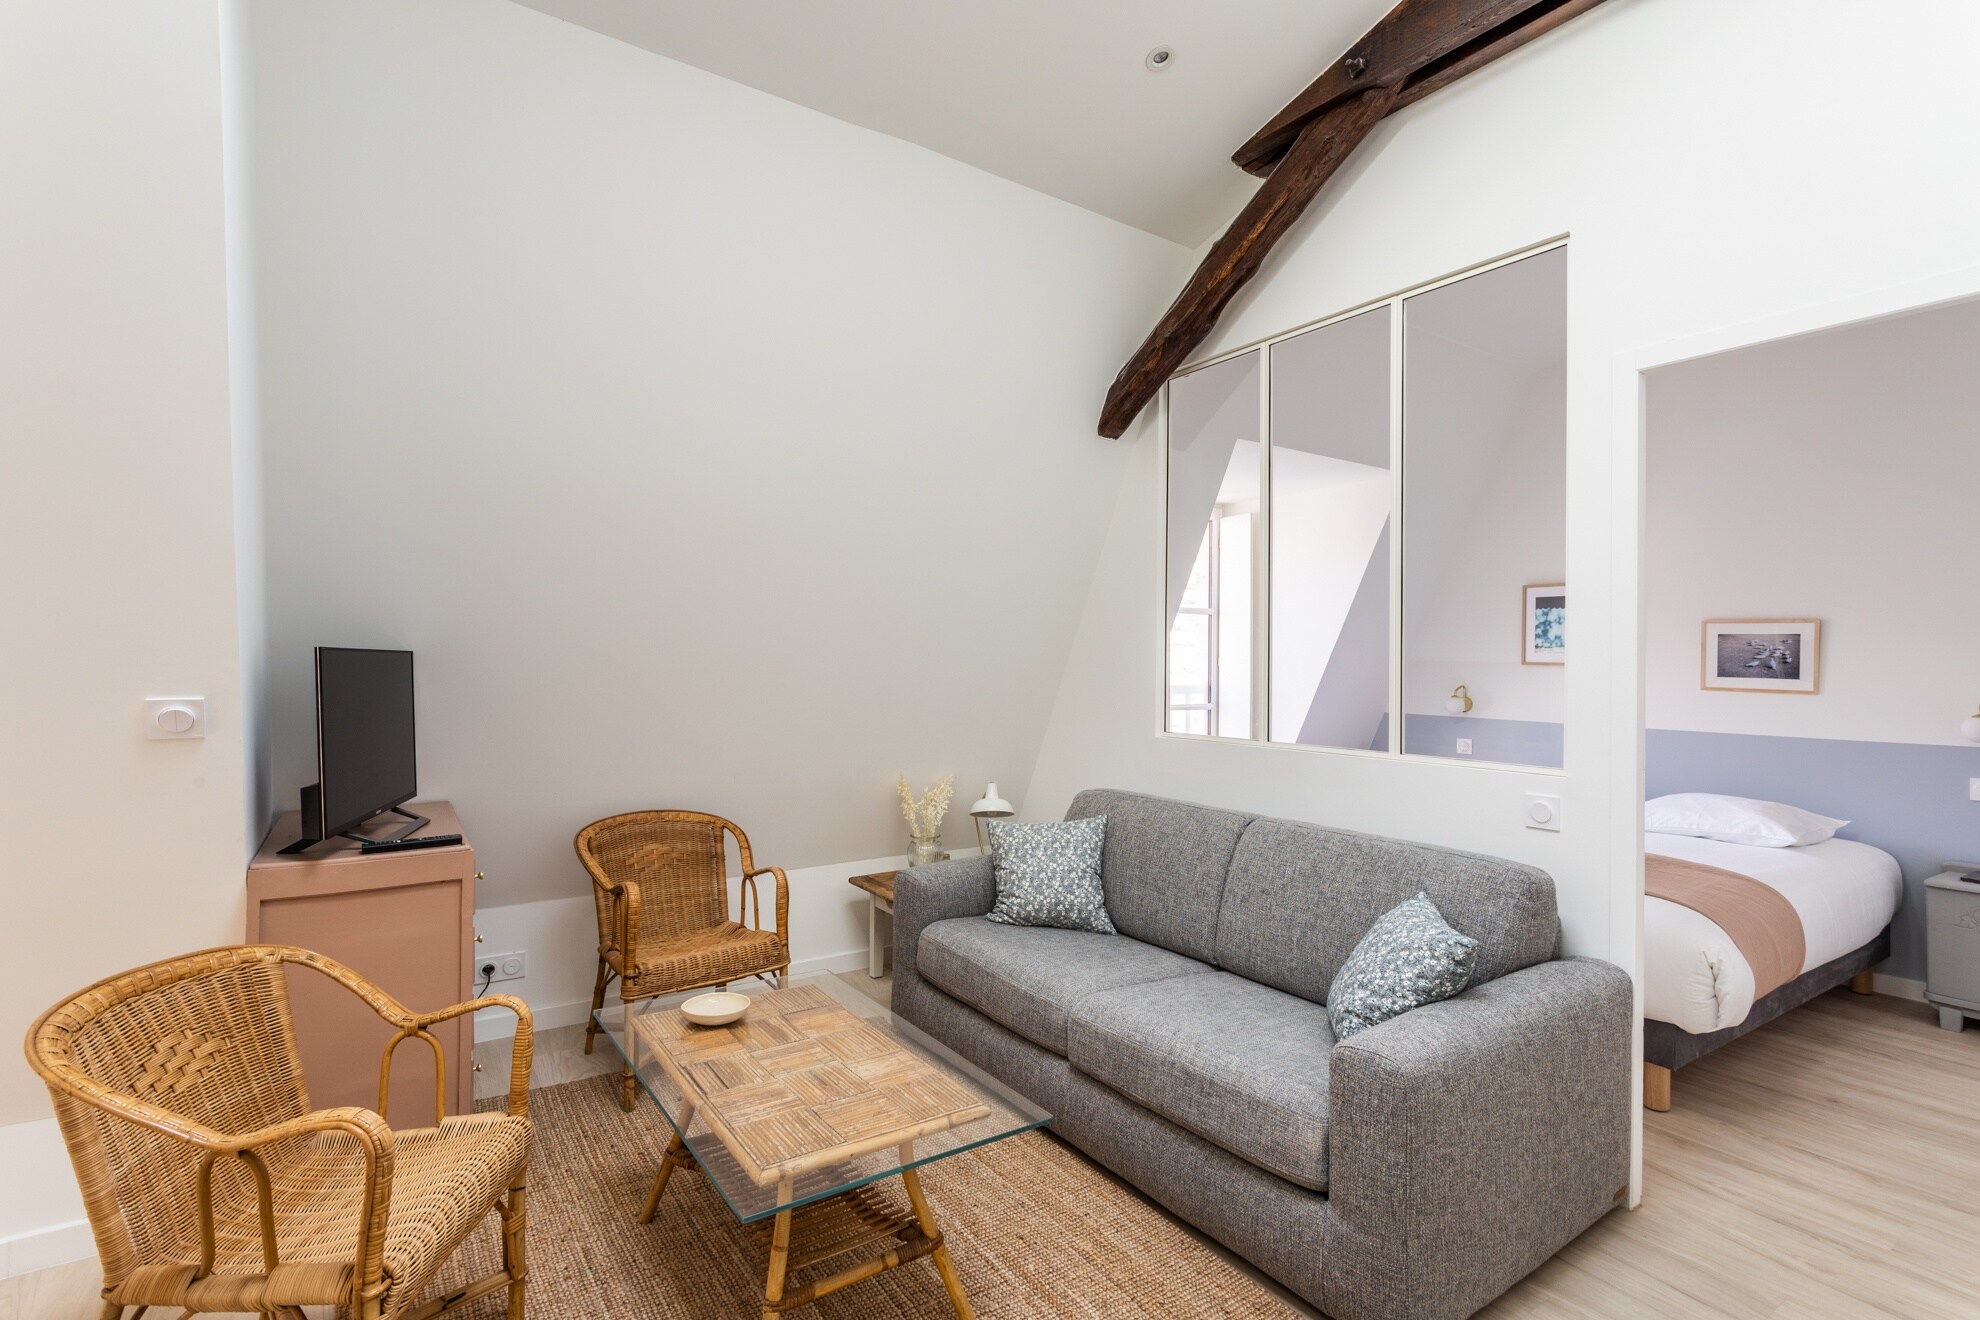 Property Image 2 - Cozy and modern two bedroom apartment in the centre of Rennes